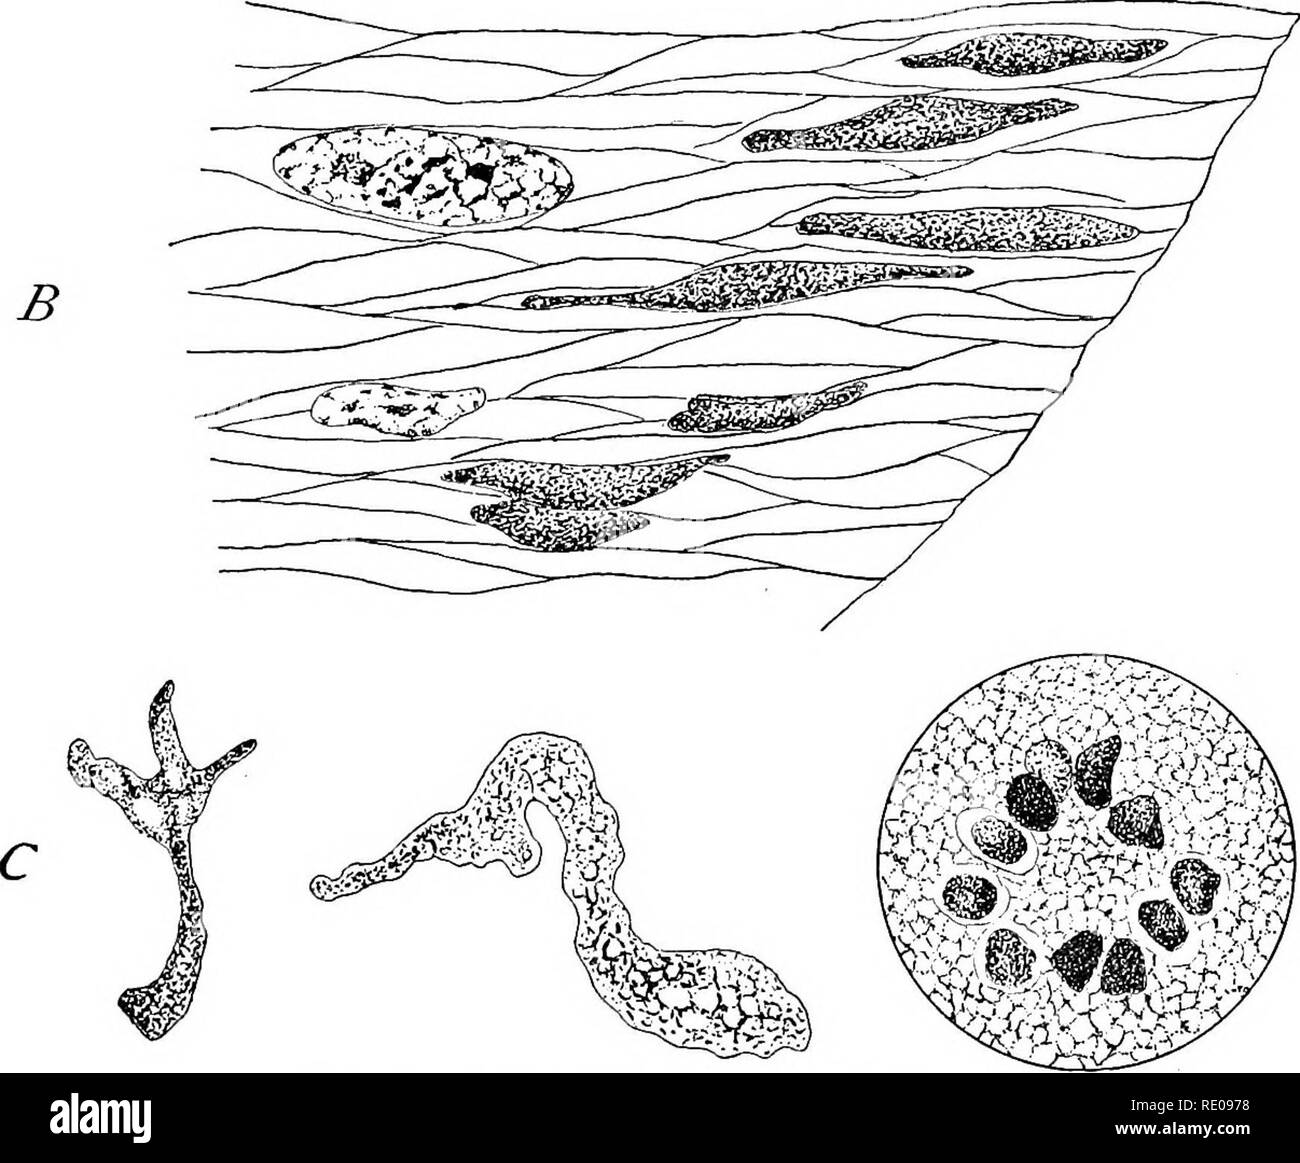 . The Protozoa. Protozoa. Fig. 81. —Lympkosporidium truttcE Calkins. A. The young spnrozoite and its development. B. Older forms in the muscle-bundles surround- ing the intestine. C. Still older amoeboid iorm prior to, and during, spore-iormation. above, to be used during the process of spore-formation and encyst- ment. In Sarcosporidiida and other muscle-infesting Sporozoa, growth takes place at the expense of the muscle-cells, although the organisms are not intra-cellular parasites. Thus, Lympkosporidium trutttz begins to grow in the lymph surrounding the intestine. The sporozoite develops i Stock Photo